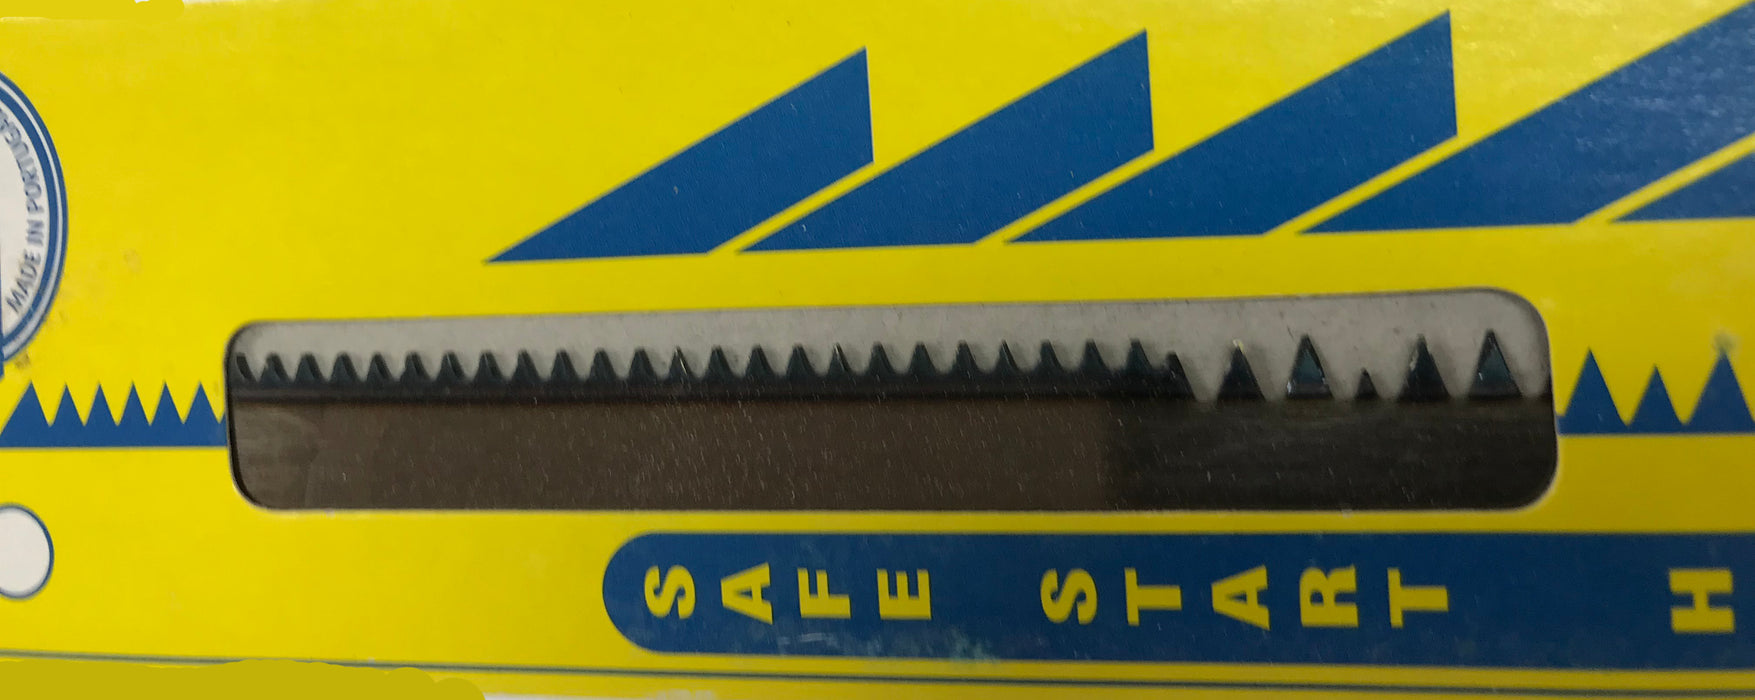 Bow Saw Replacement Blade - SmartCut  - Tri tooth - 36"